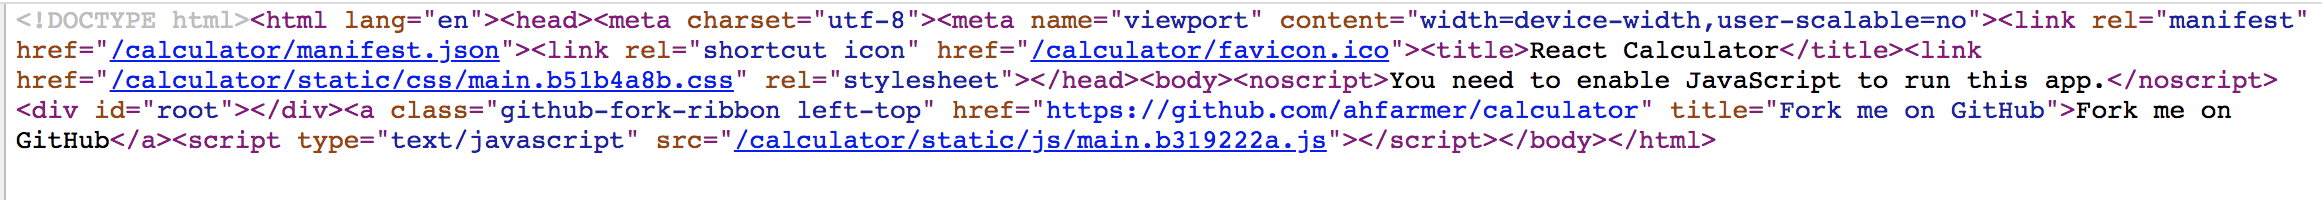 An example of html that was client side rendered